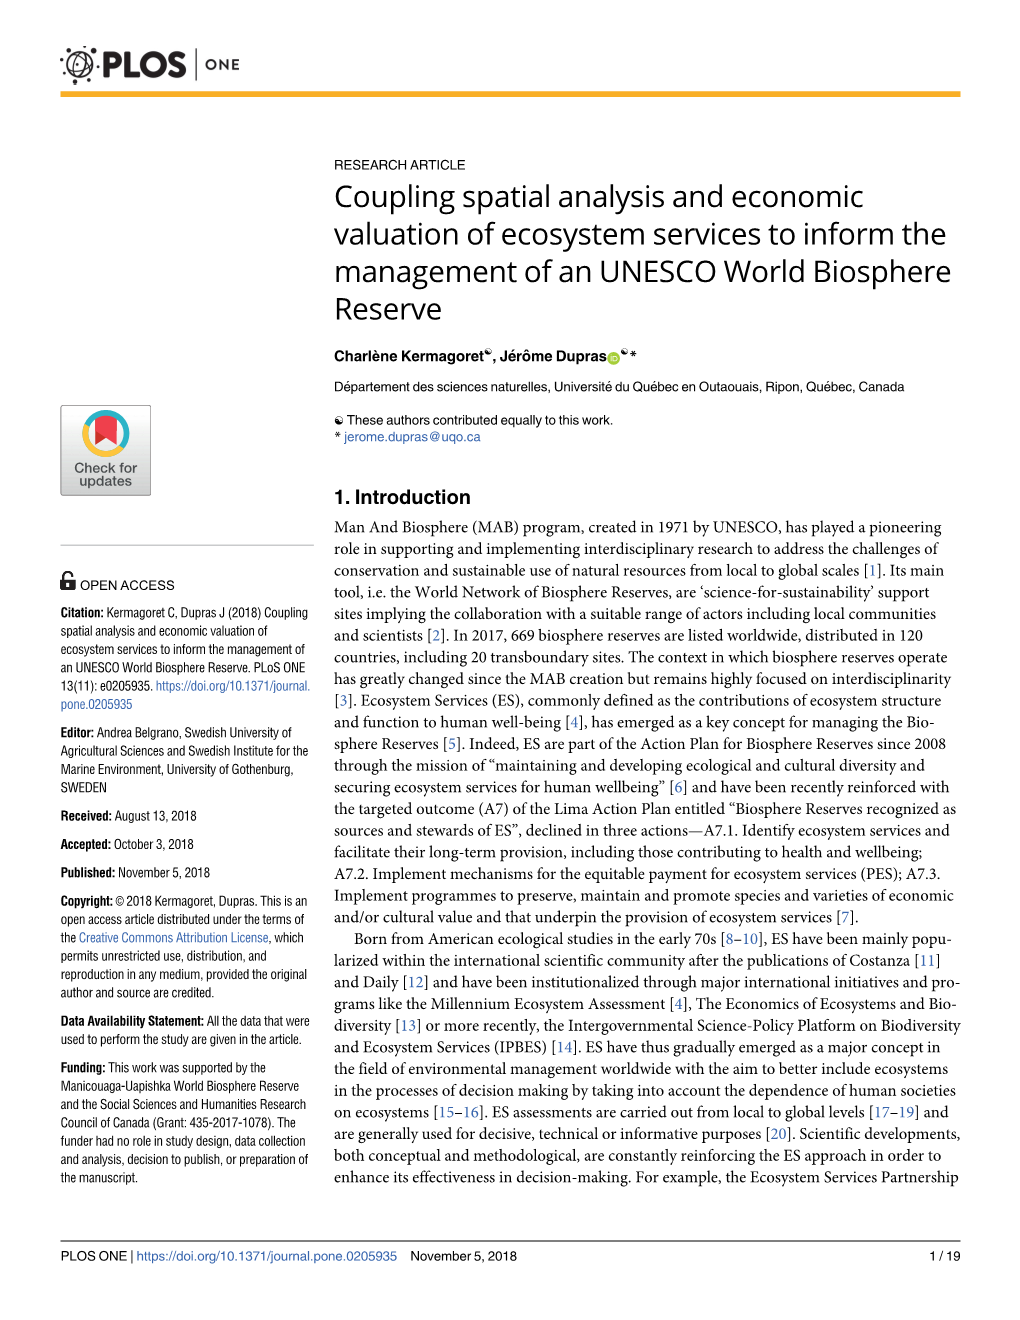 Coupling Spatial Analysis and Economic Valuation of Ecosystem Services to Inform the Management of an UNESCO World Biosphere Reserve